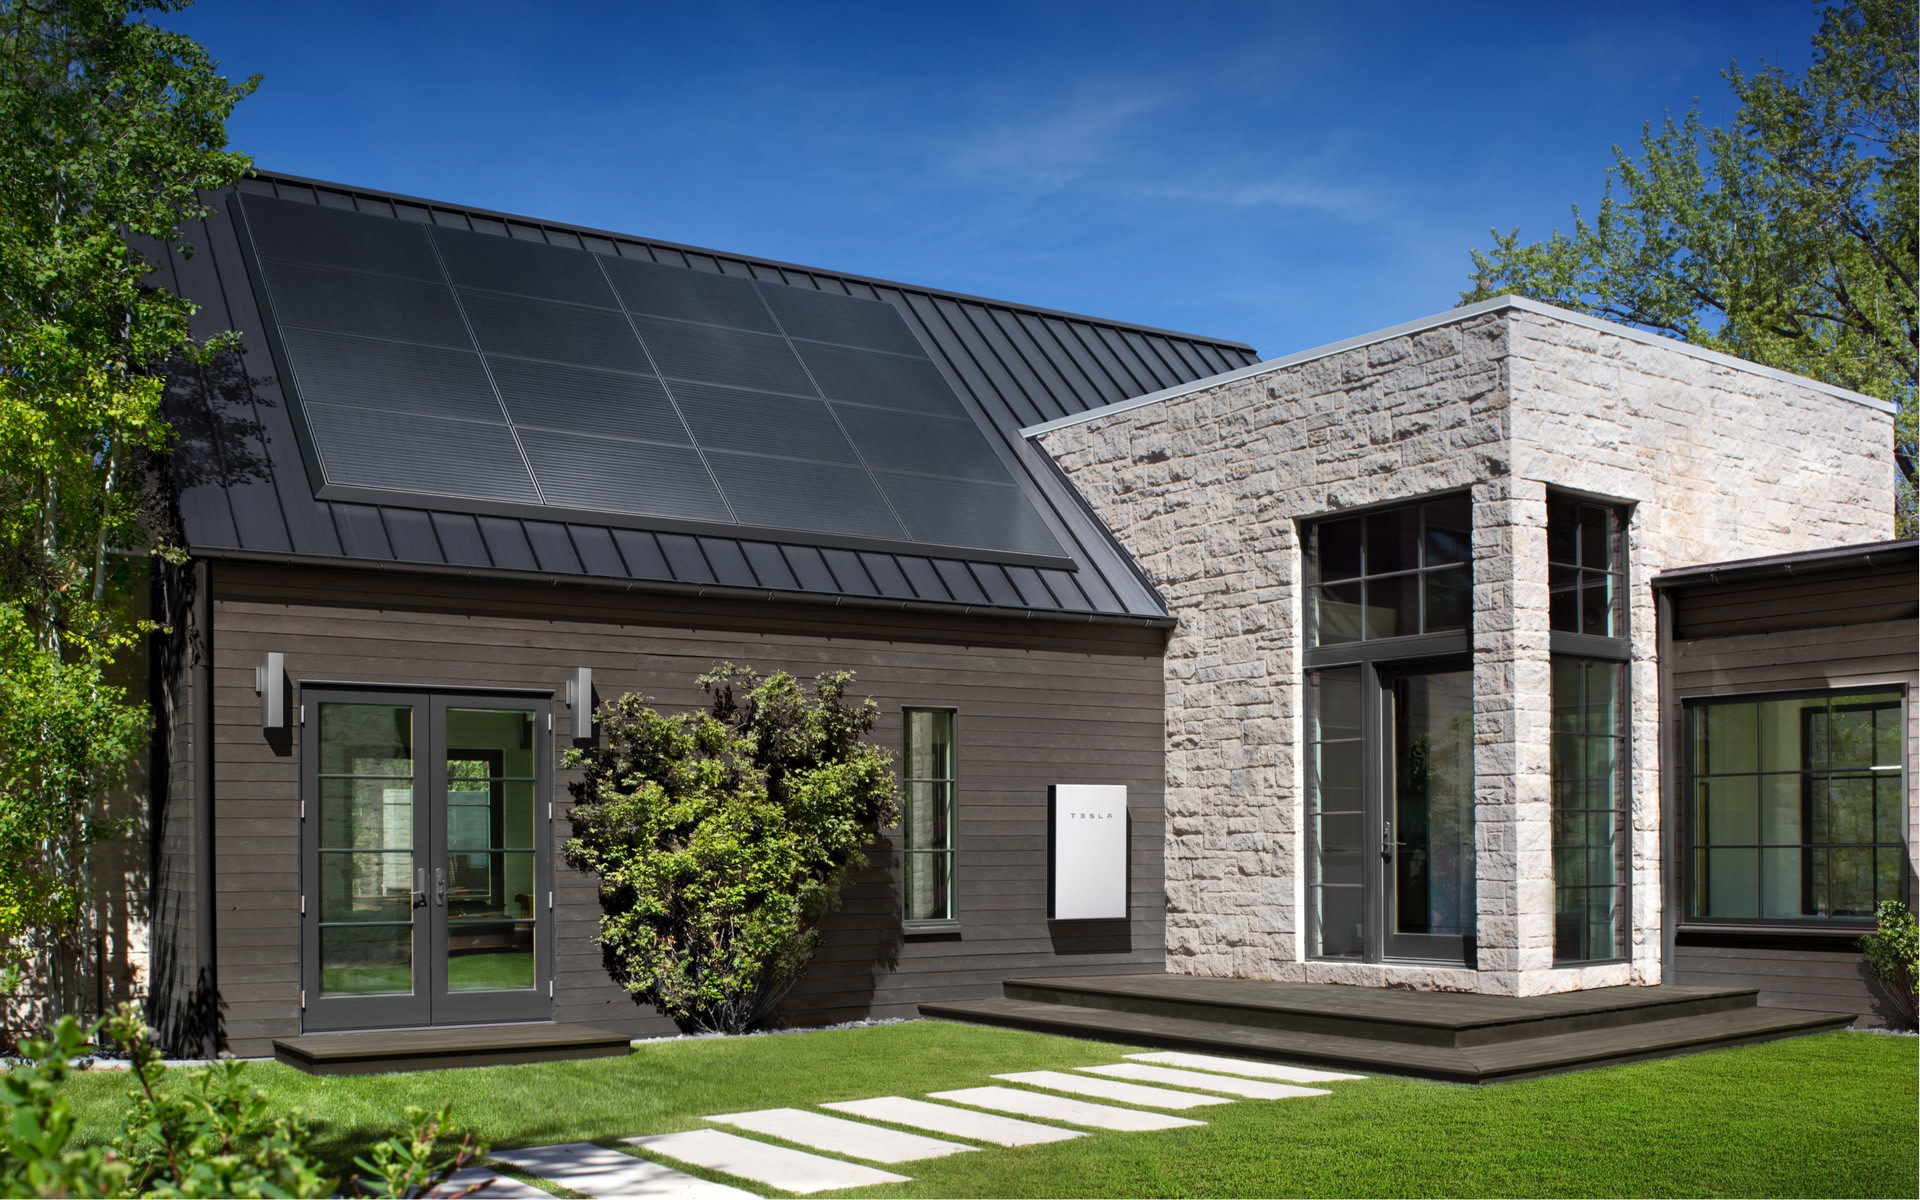 House with Tesla Powerwall and solar panels on the roof